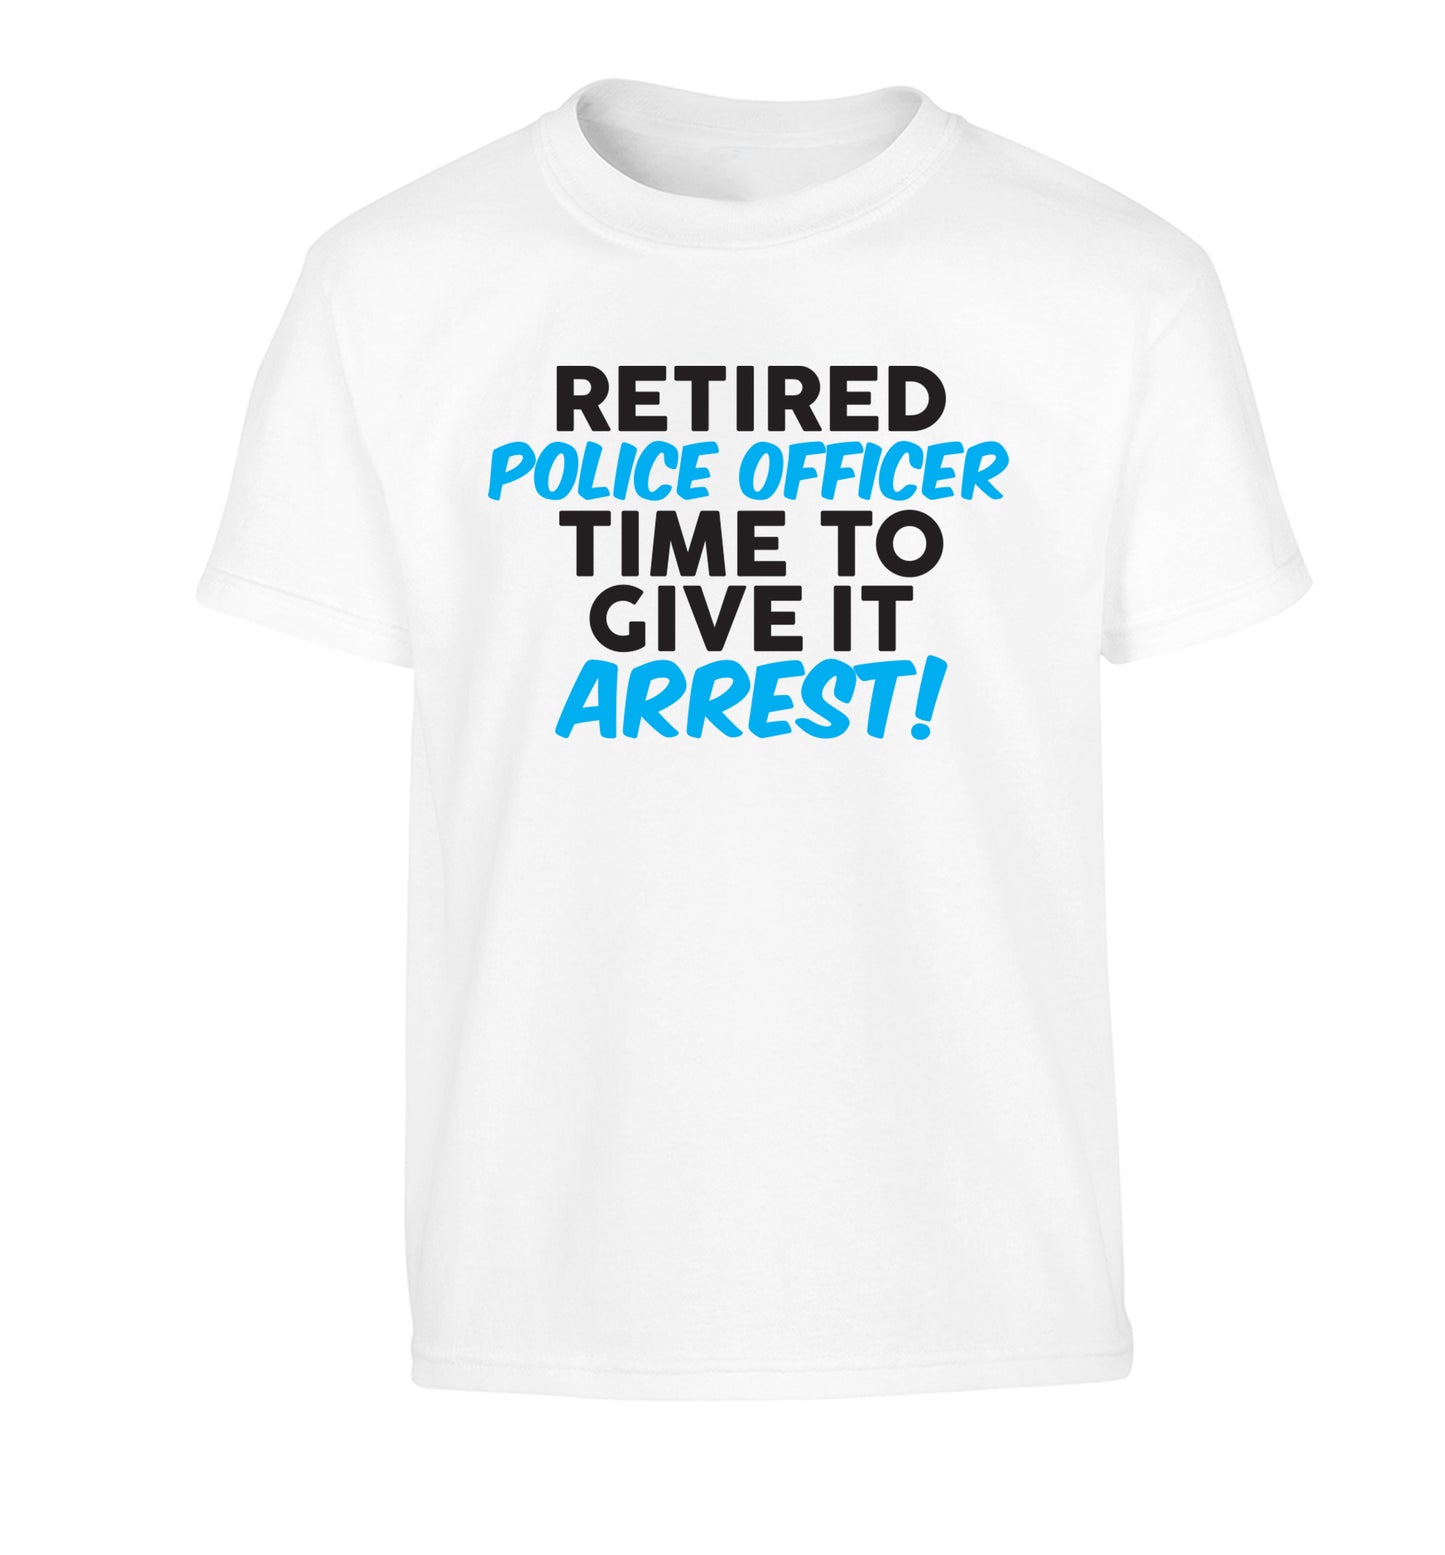 Retired police officer time to give it arrest Children's white Tshirt 12-13 Years